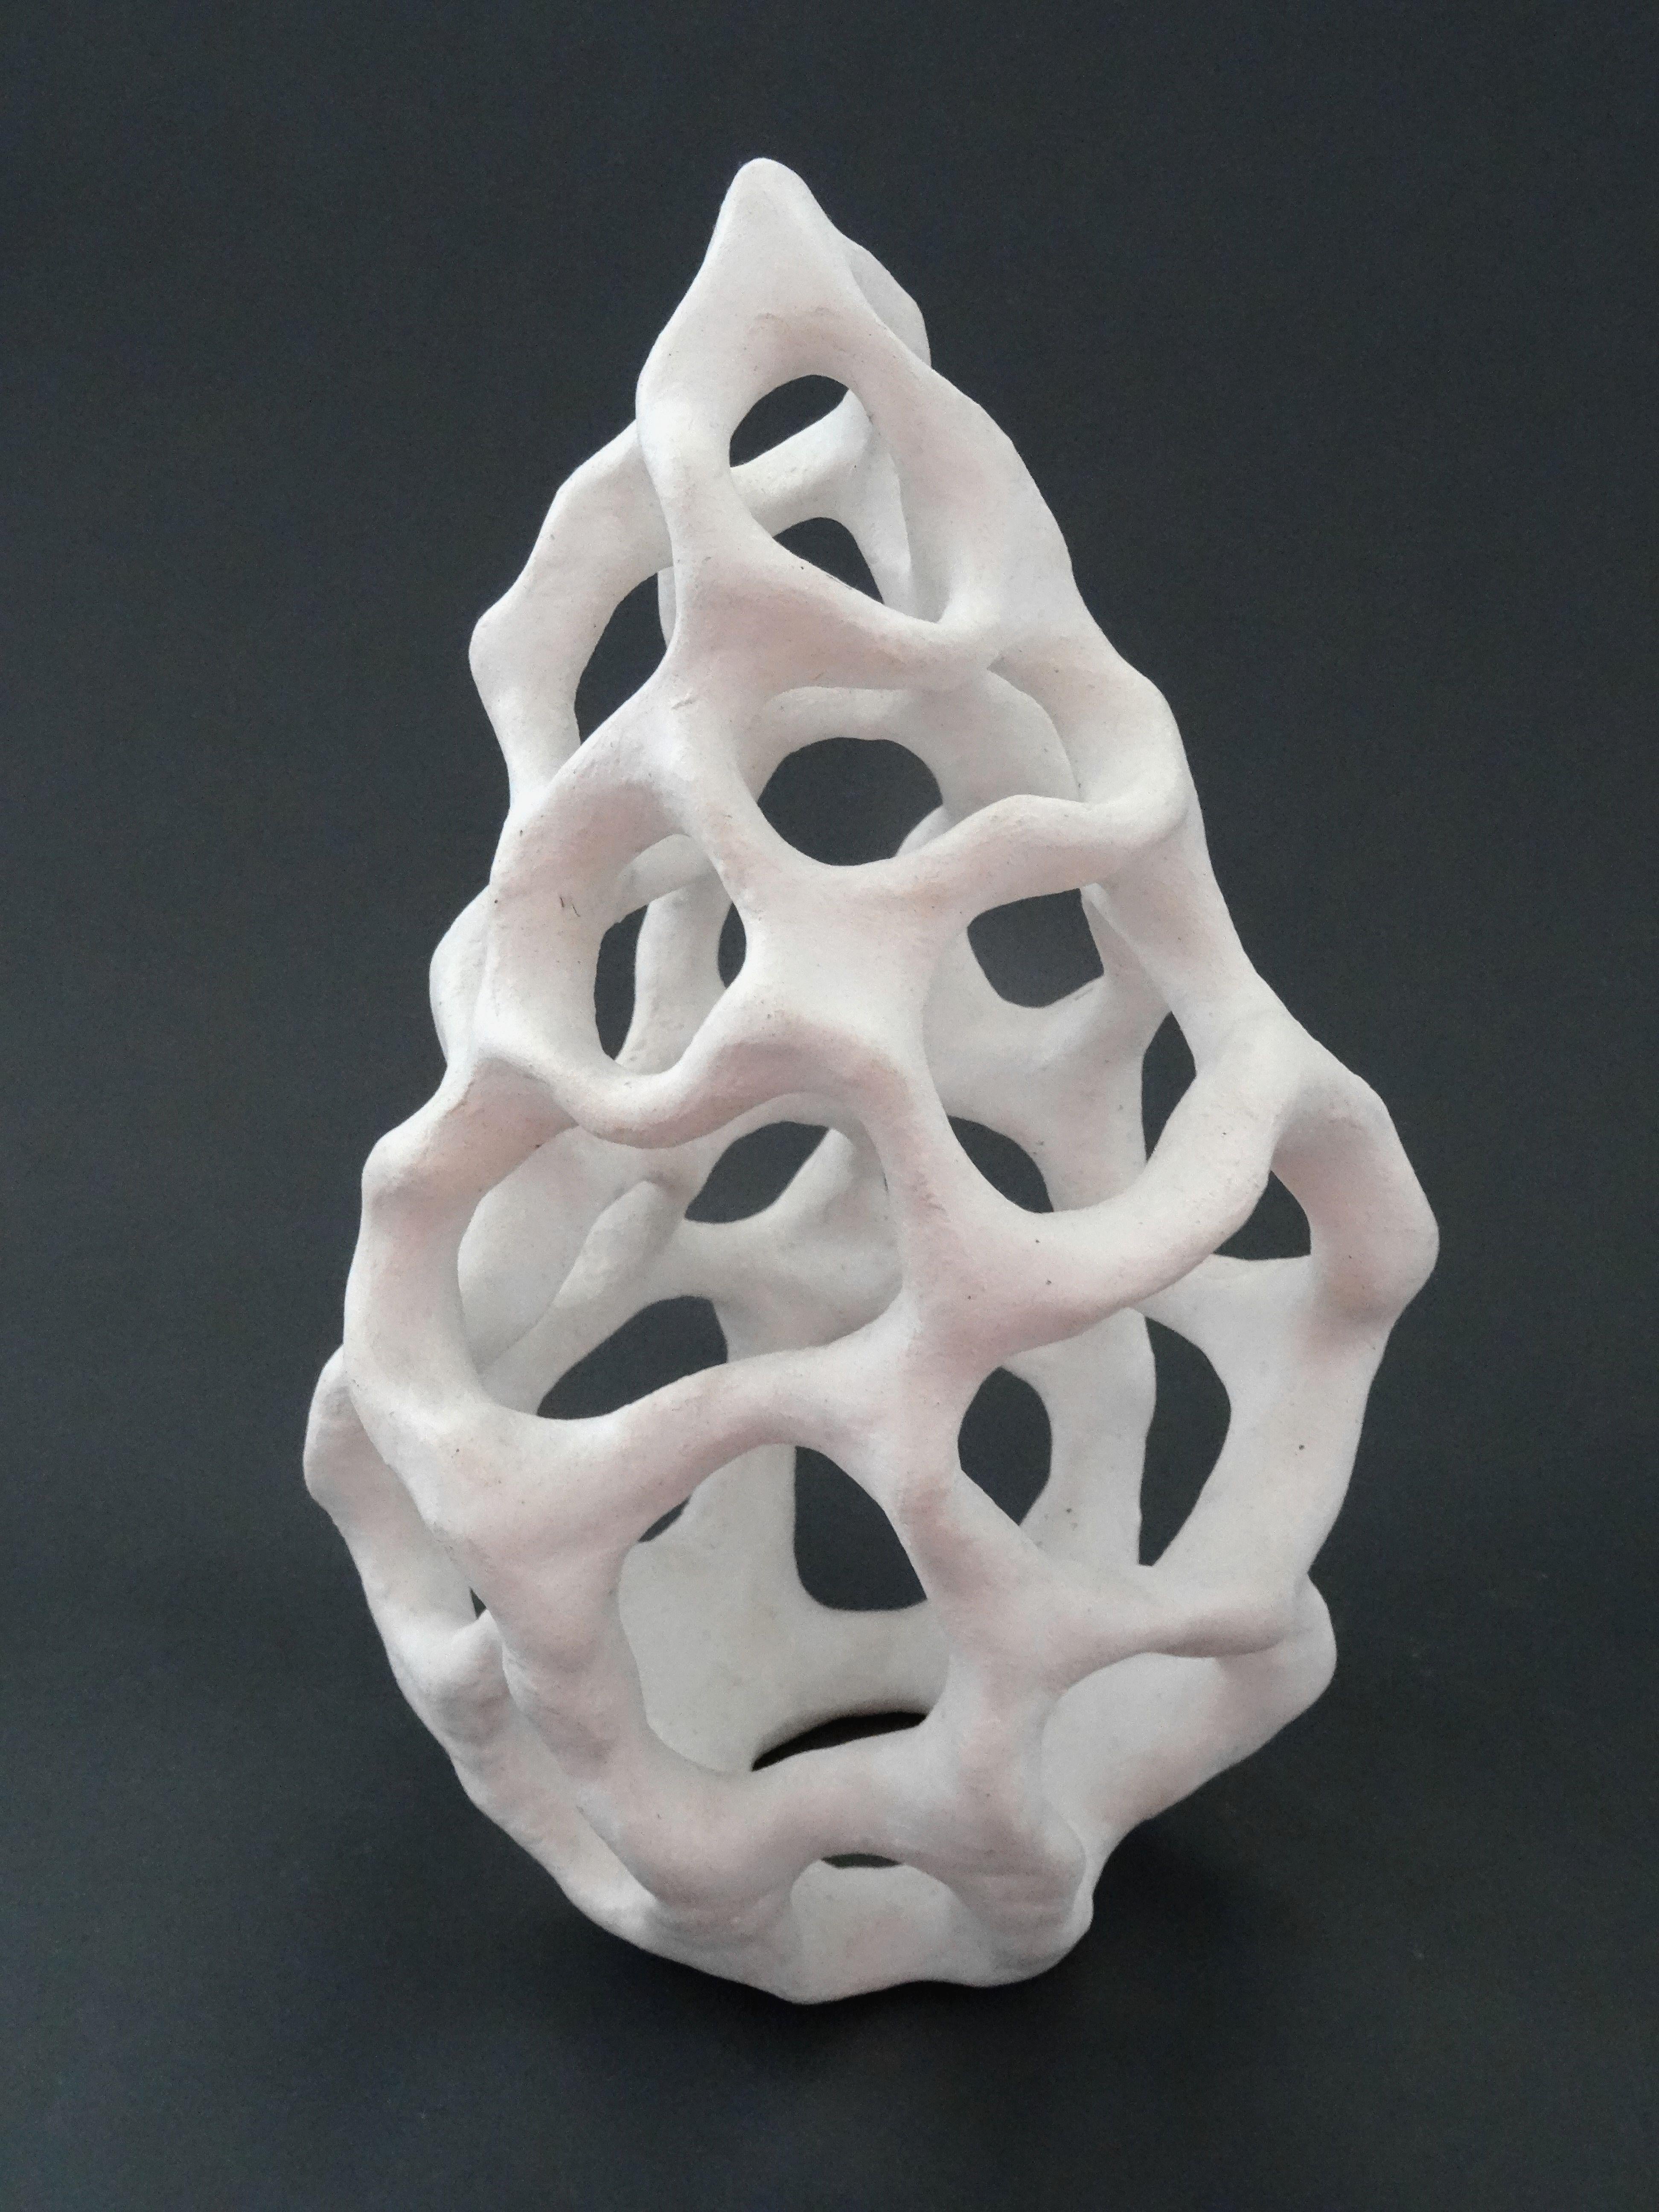 Elina Titane  Abstract Sculpture - Infinity loops. White stone mass h 24 cm